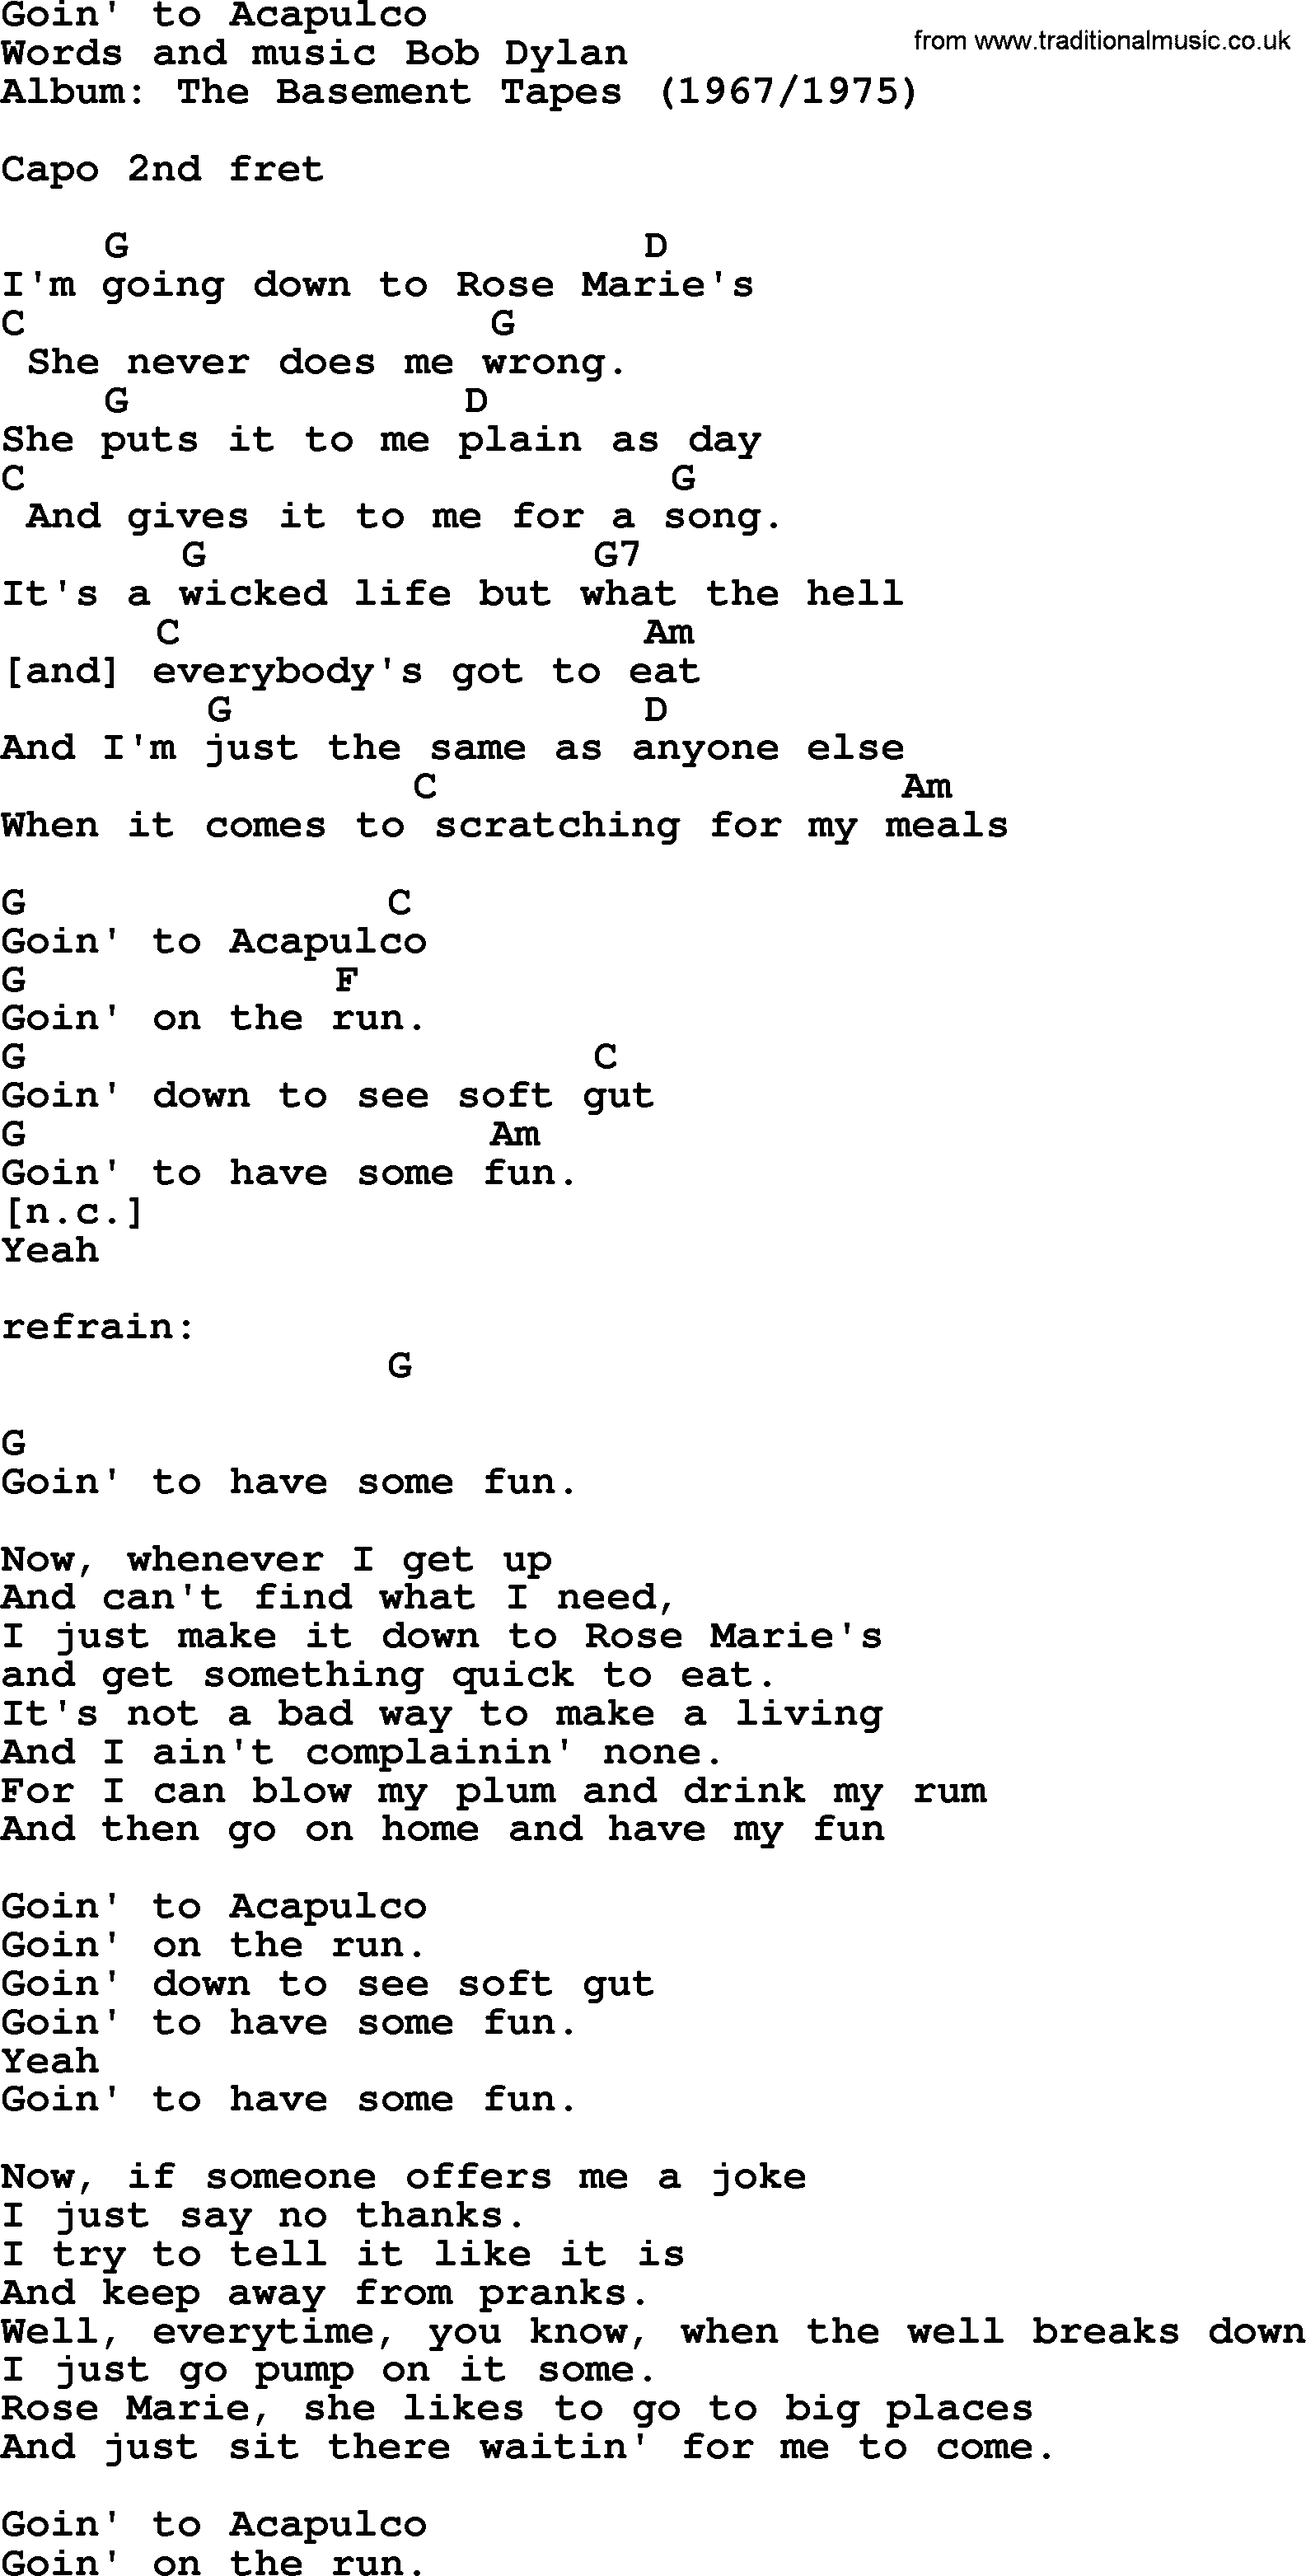 Bob Dylan song, lyrics with chords - Goin' to Acapulco